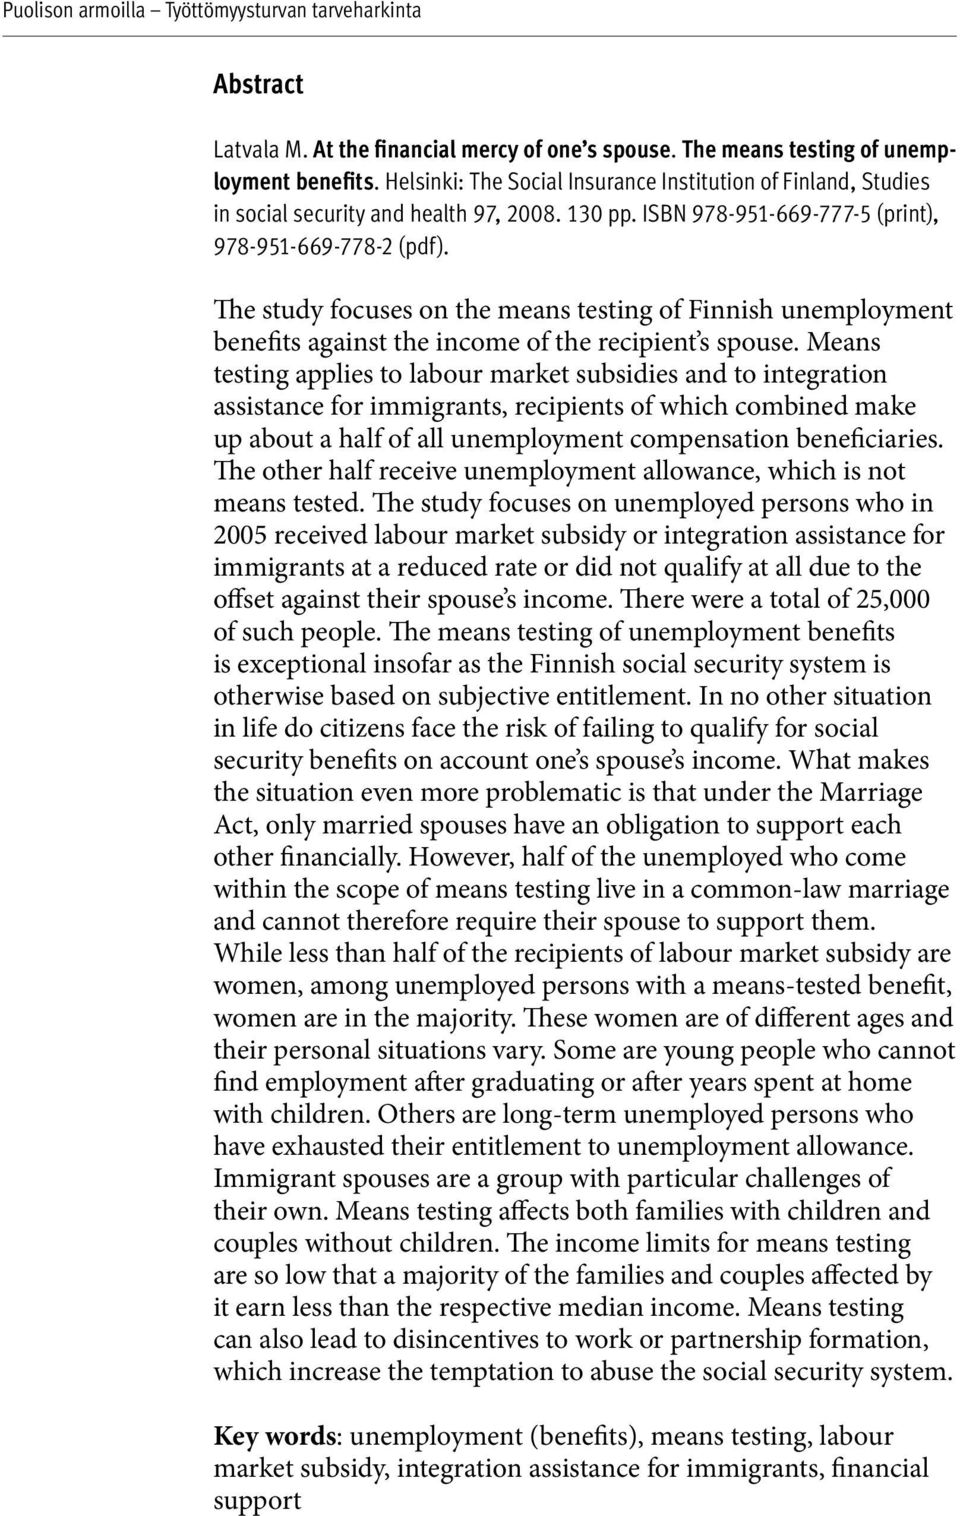 The study focuses on the means testing of Finnish unemployment benefits against the income of the recipient s spouse.